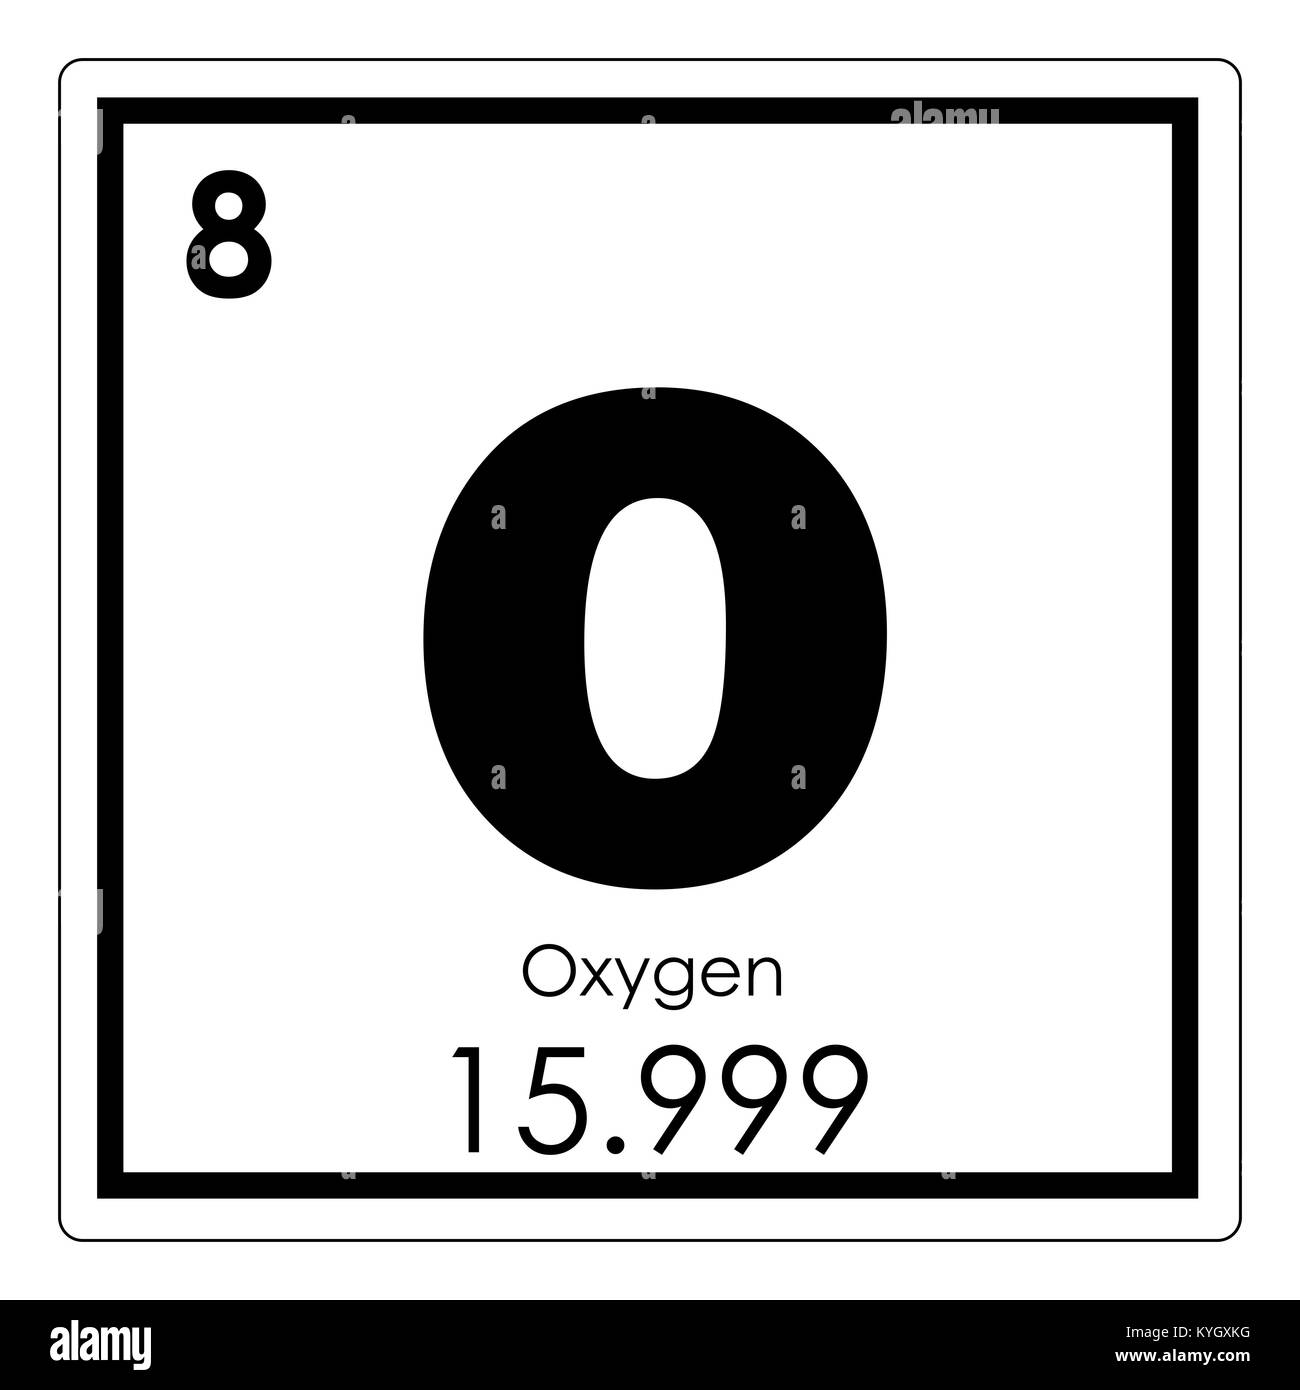 Oxygen chemical element periodic table science symbol Stock Photo ...